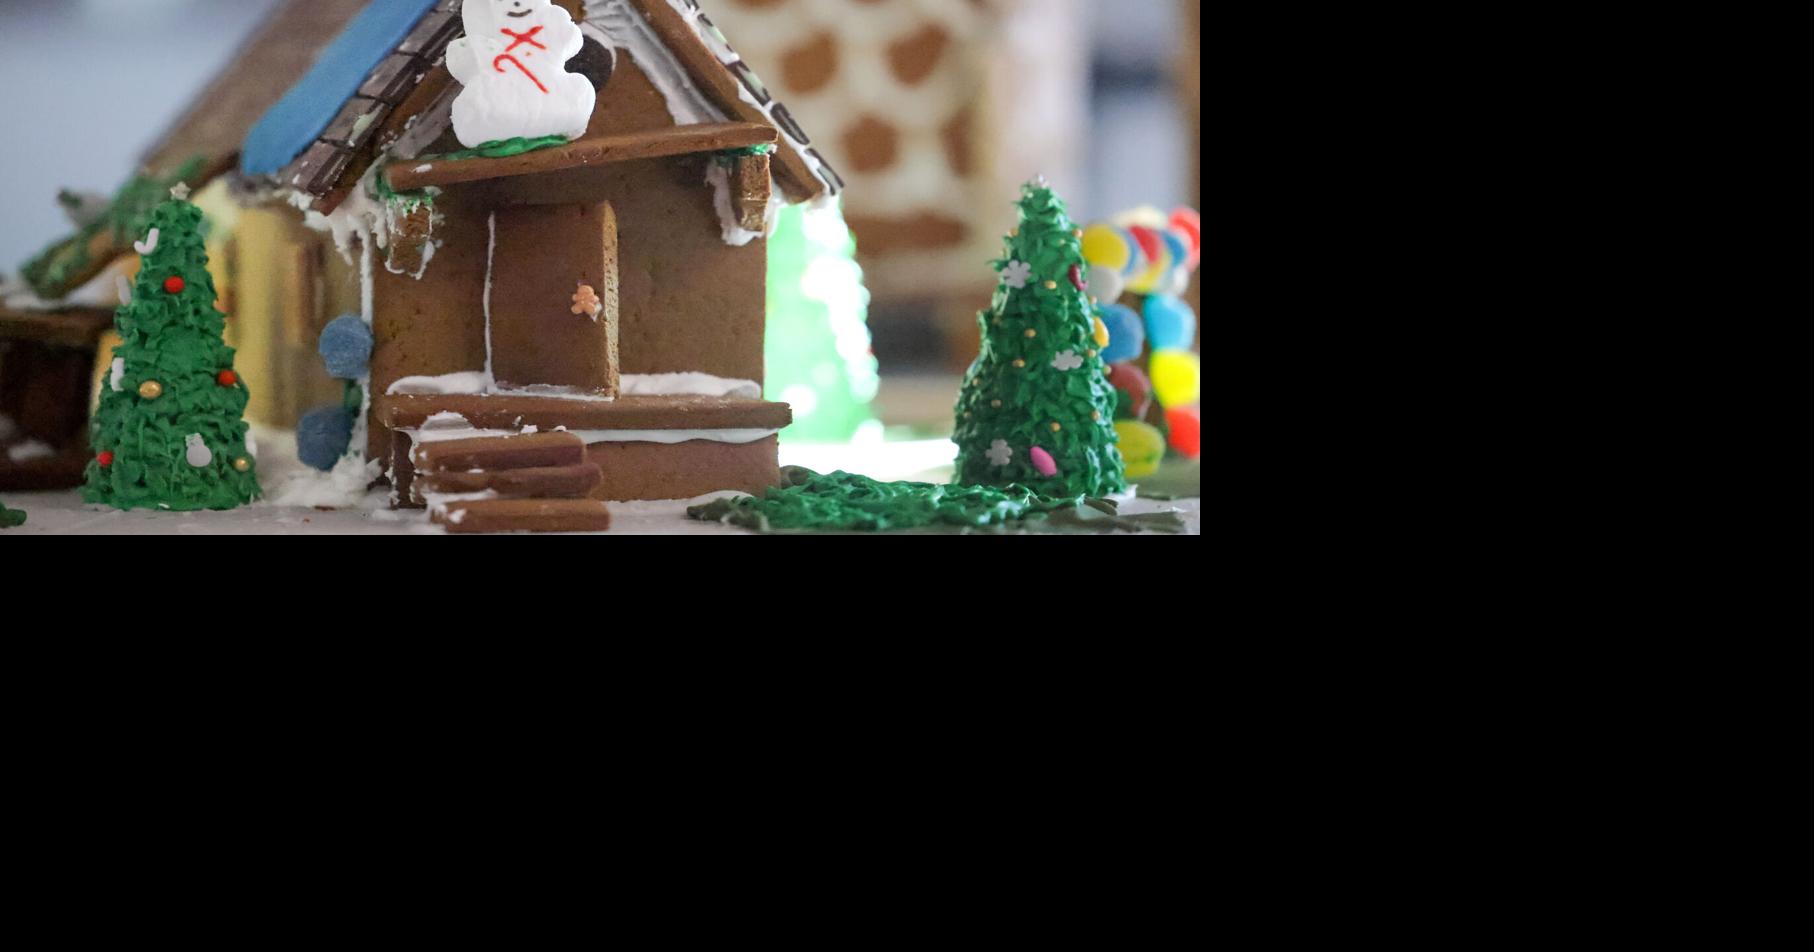 Tulane, NOCHI students team in a gingerbread house contest | Home/Garden